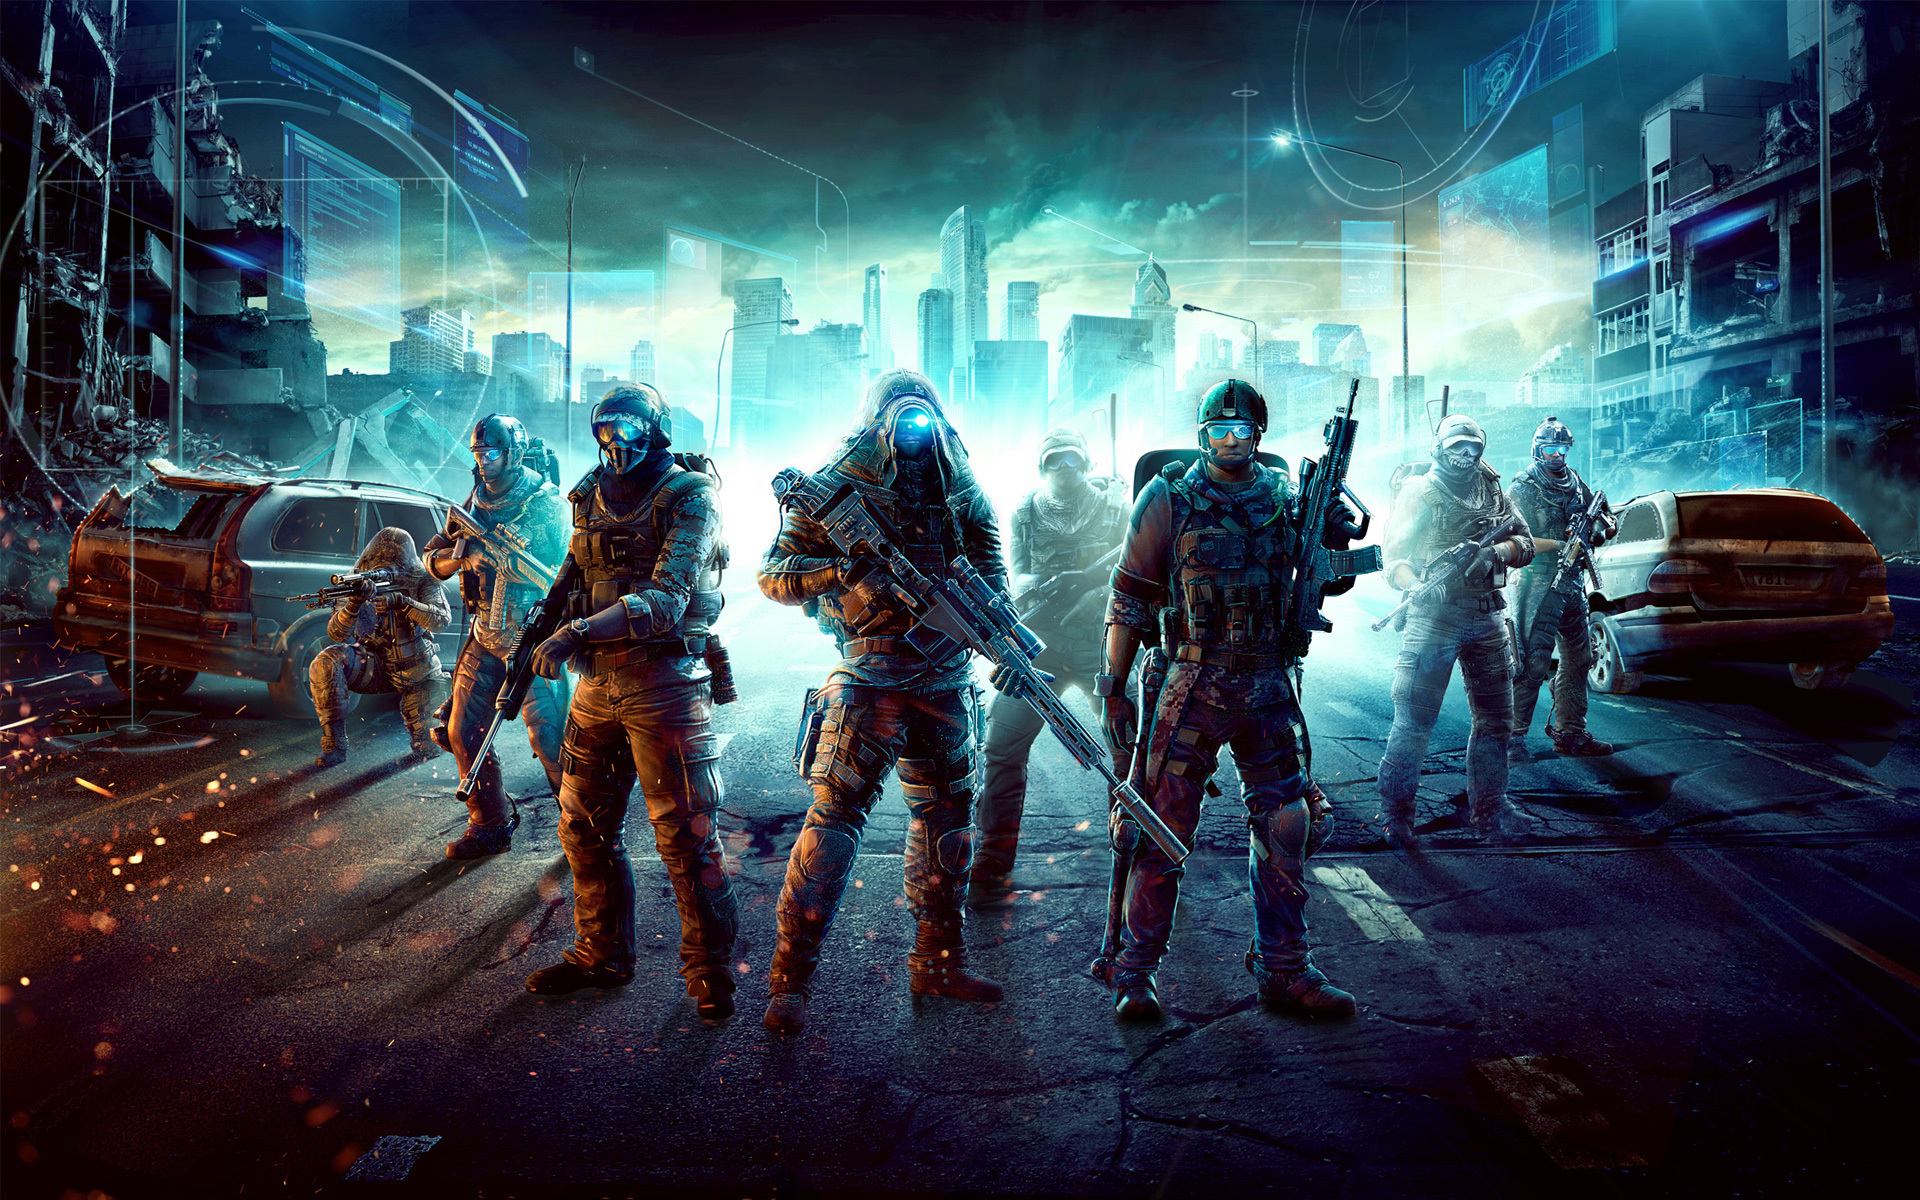 ghost recon, Ghost, Recon, Games, Video games, Warriors, Soldiers, Weapons, Guns Wallpaper